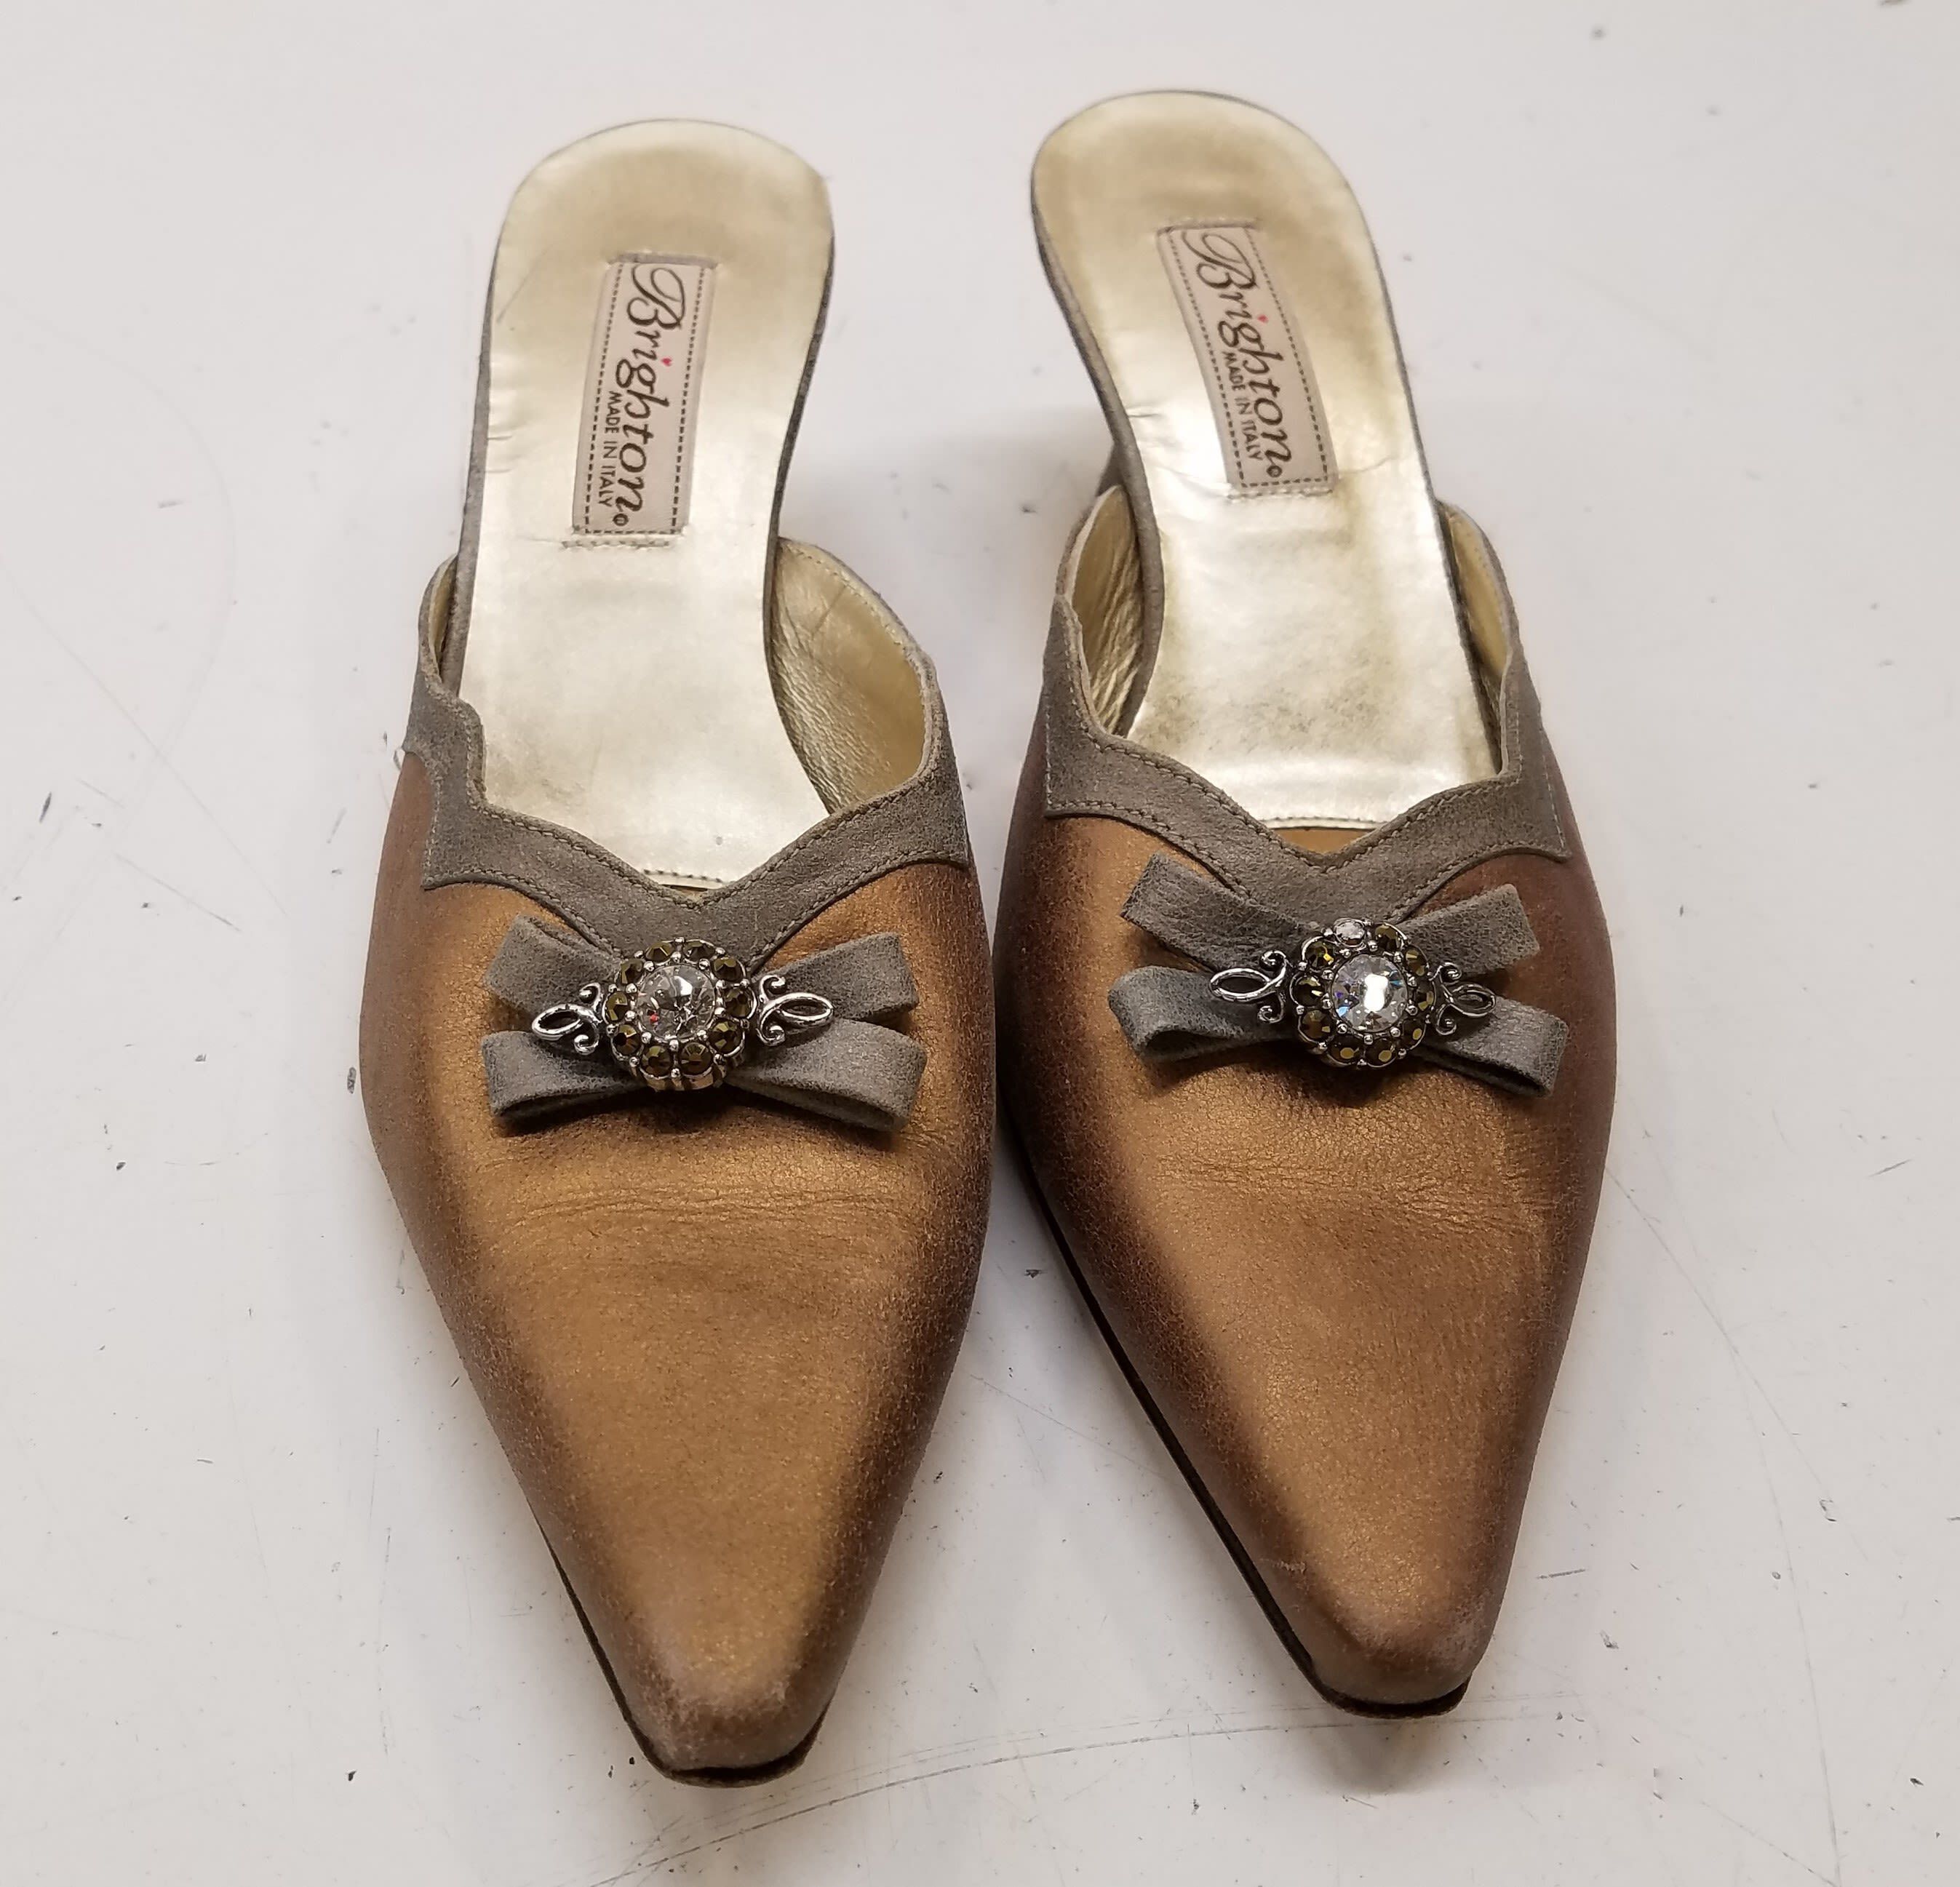 NWT $250 Brighton Vogue Made in Italy Women's 8 Brown Leather Heels Shoes  BEAUTY | eBay